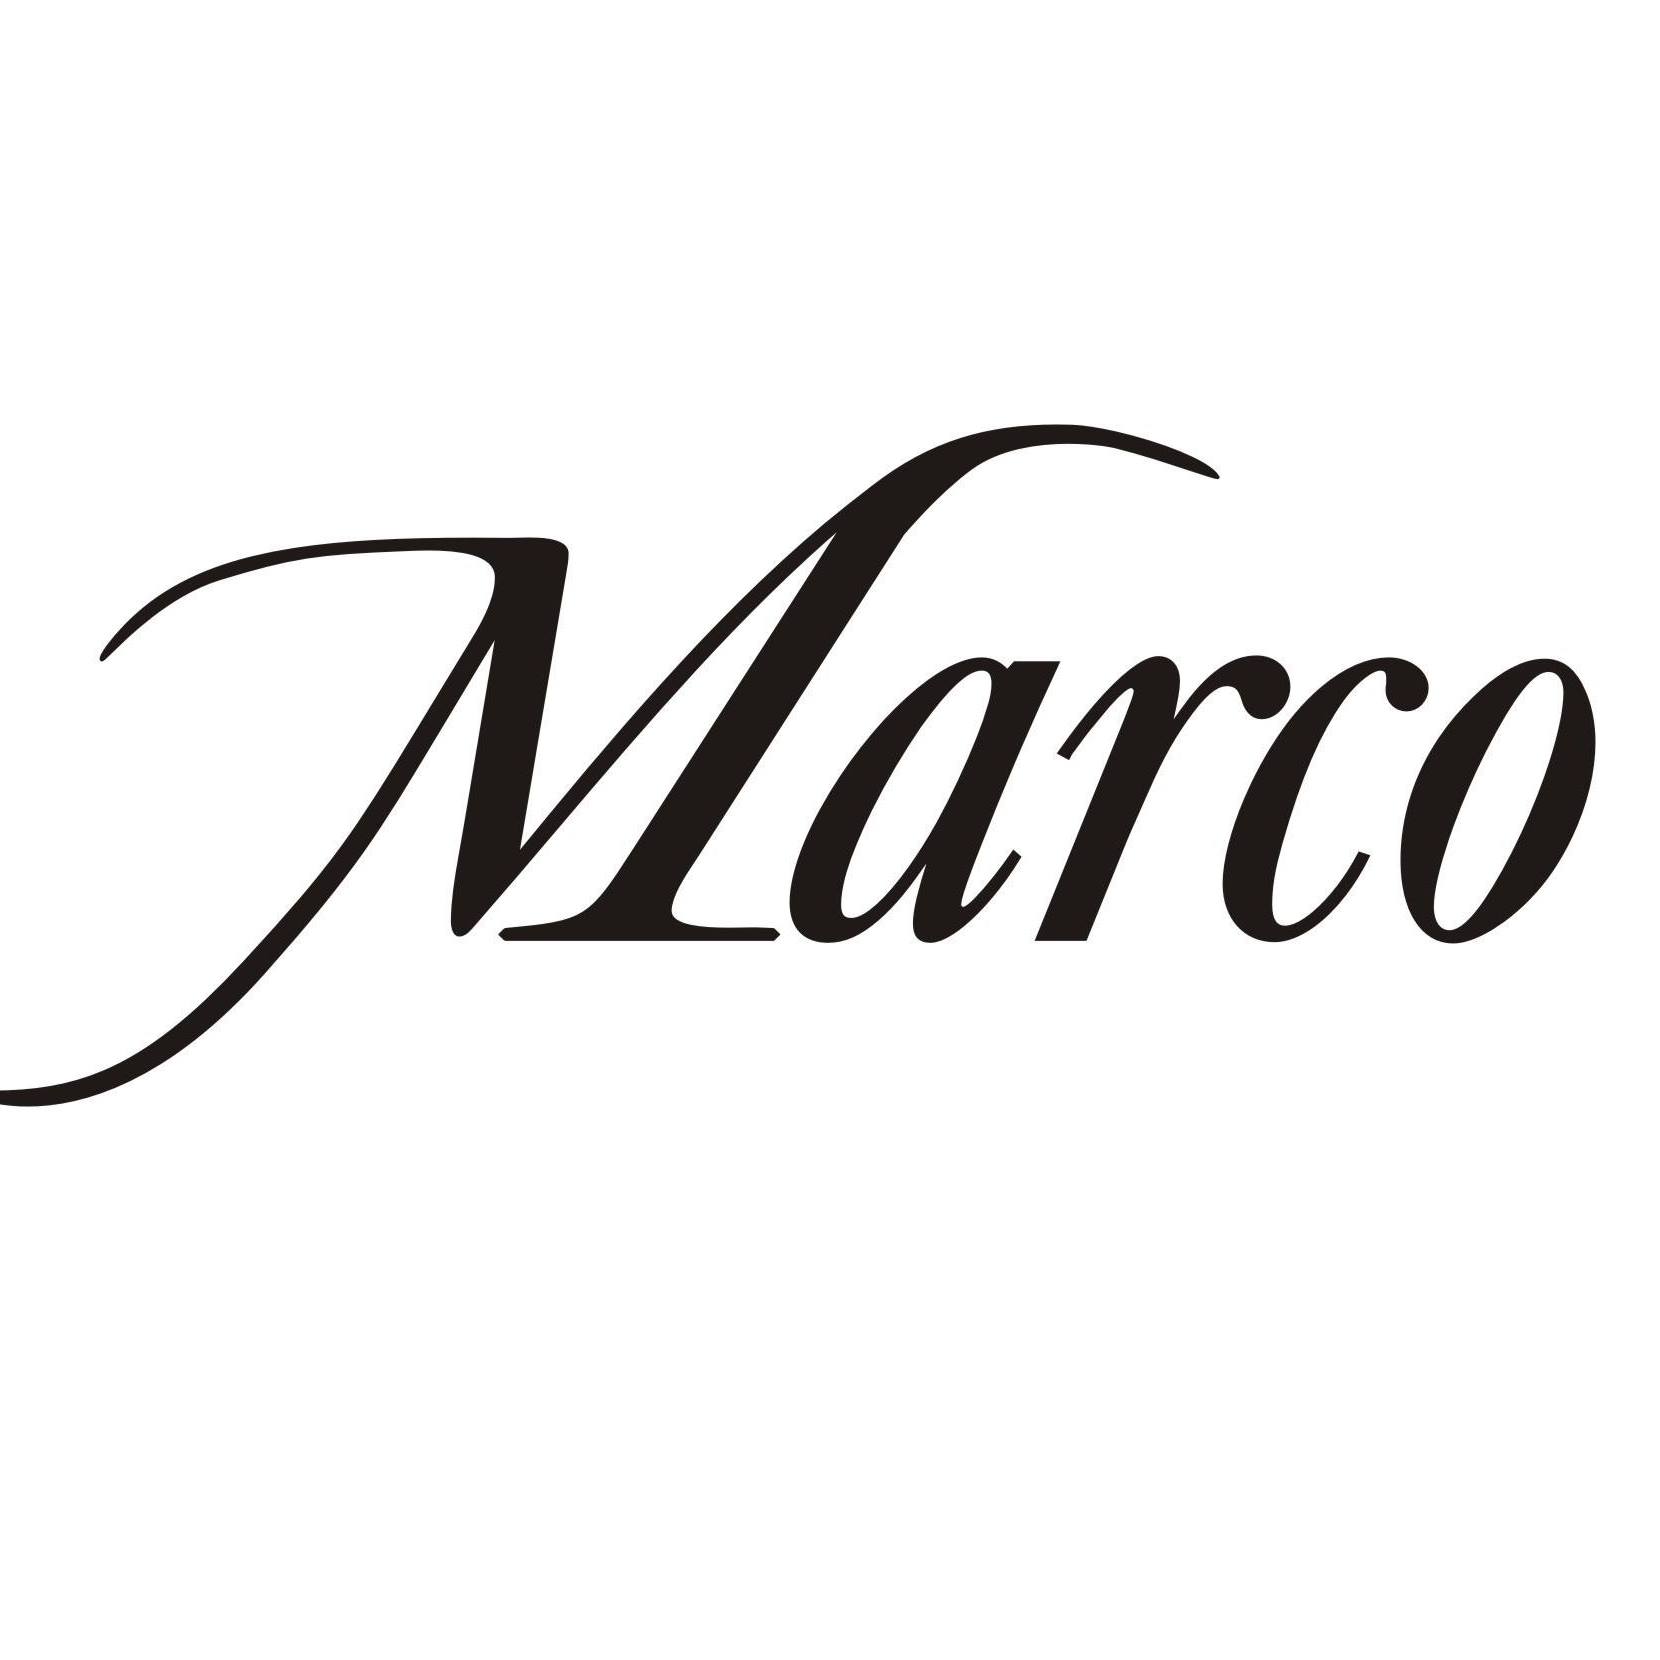 The Marco Corporation